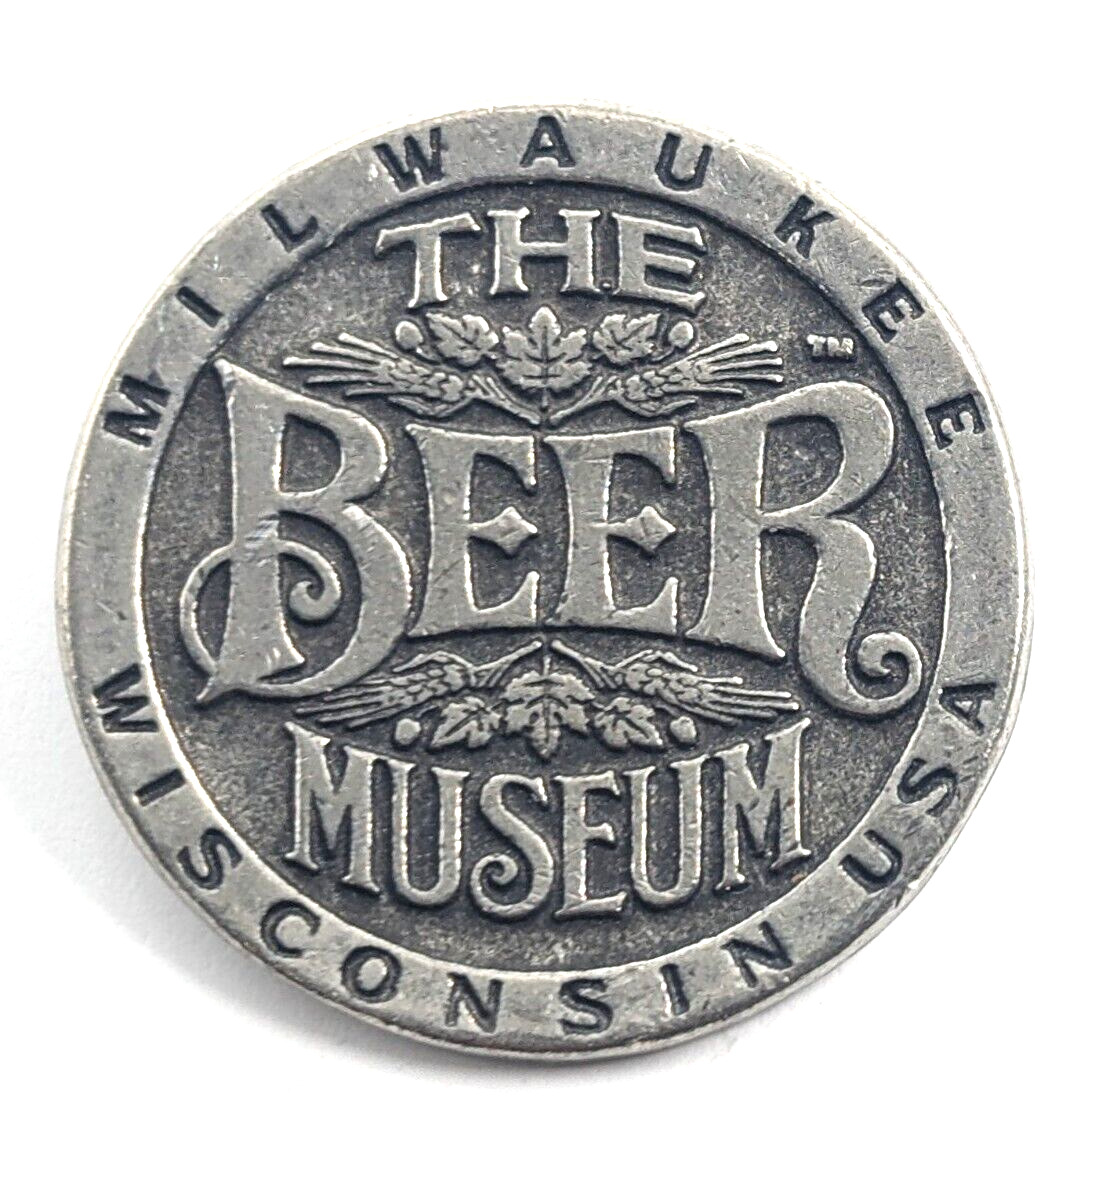 1998 Beer Museum Milwaukee Wisconsin USA 150 Years Brewing History Pin Souvenir